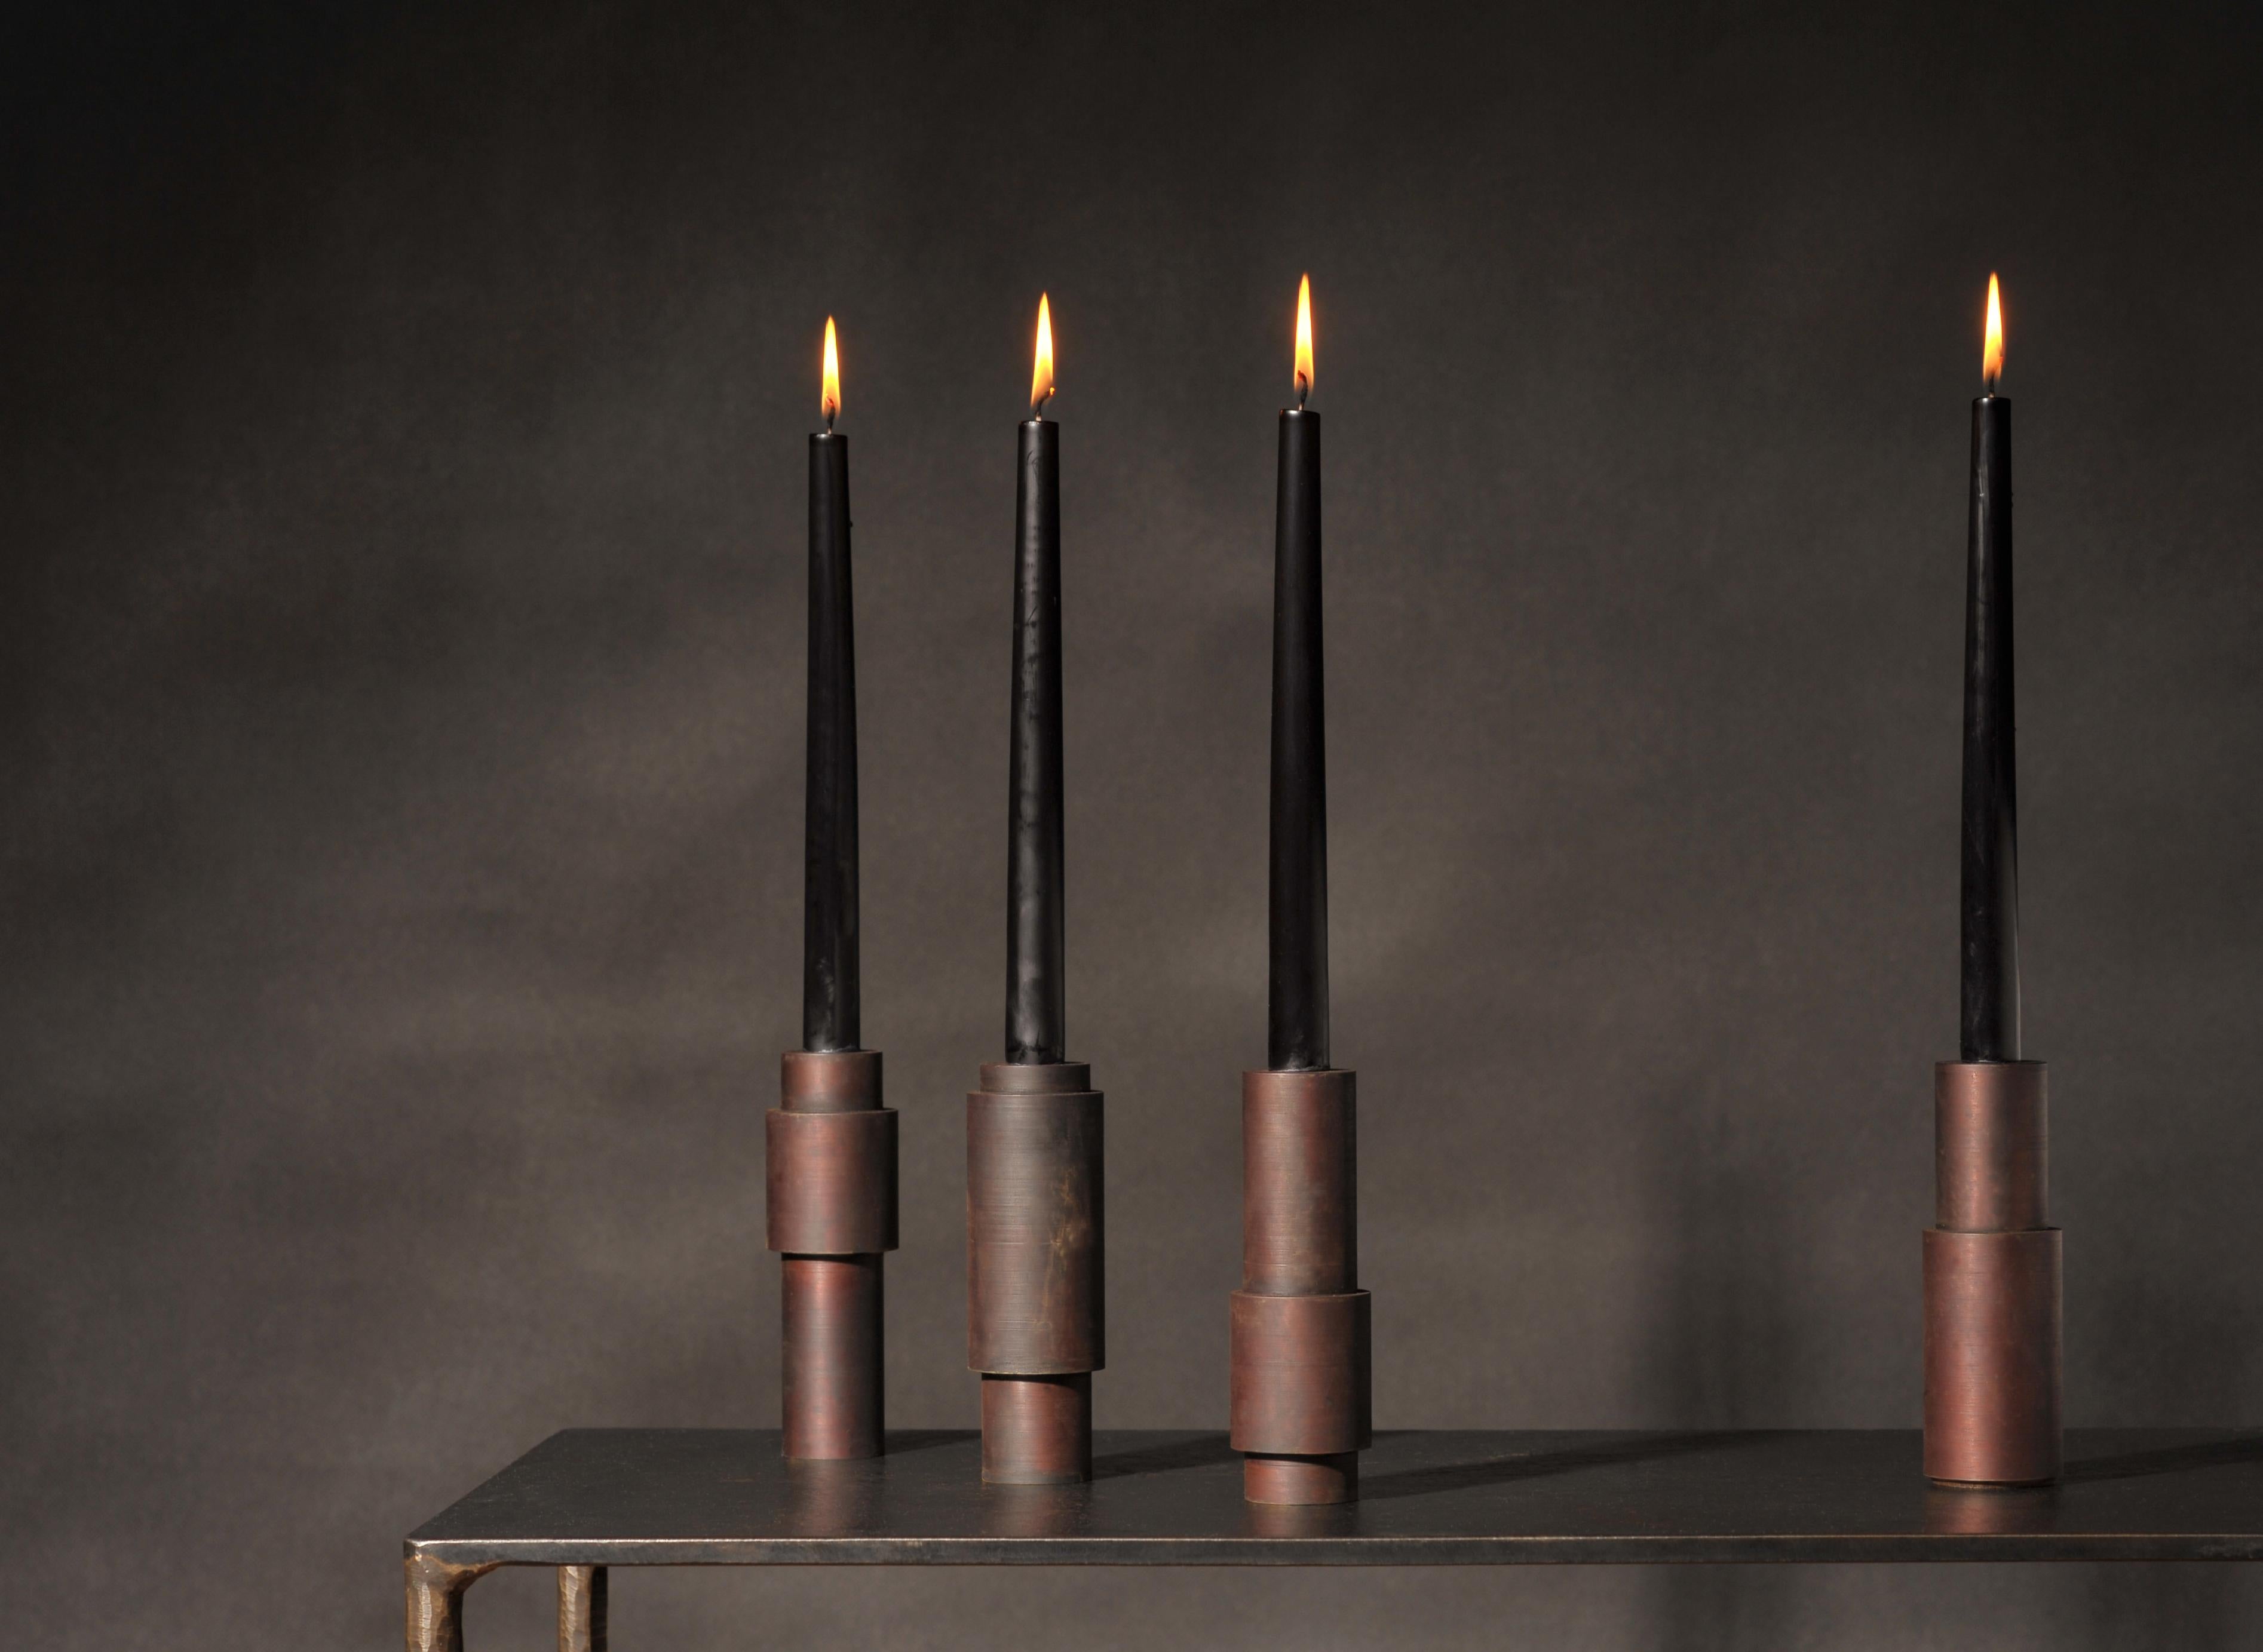 Set of 3 brown patina steel candlestick by Lukasz Friedrich.
Dimensions: D 5 x H 15 cm
Materials: Brown patina on steel.